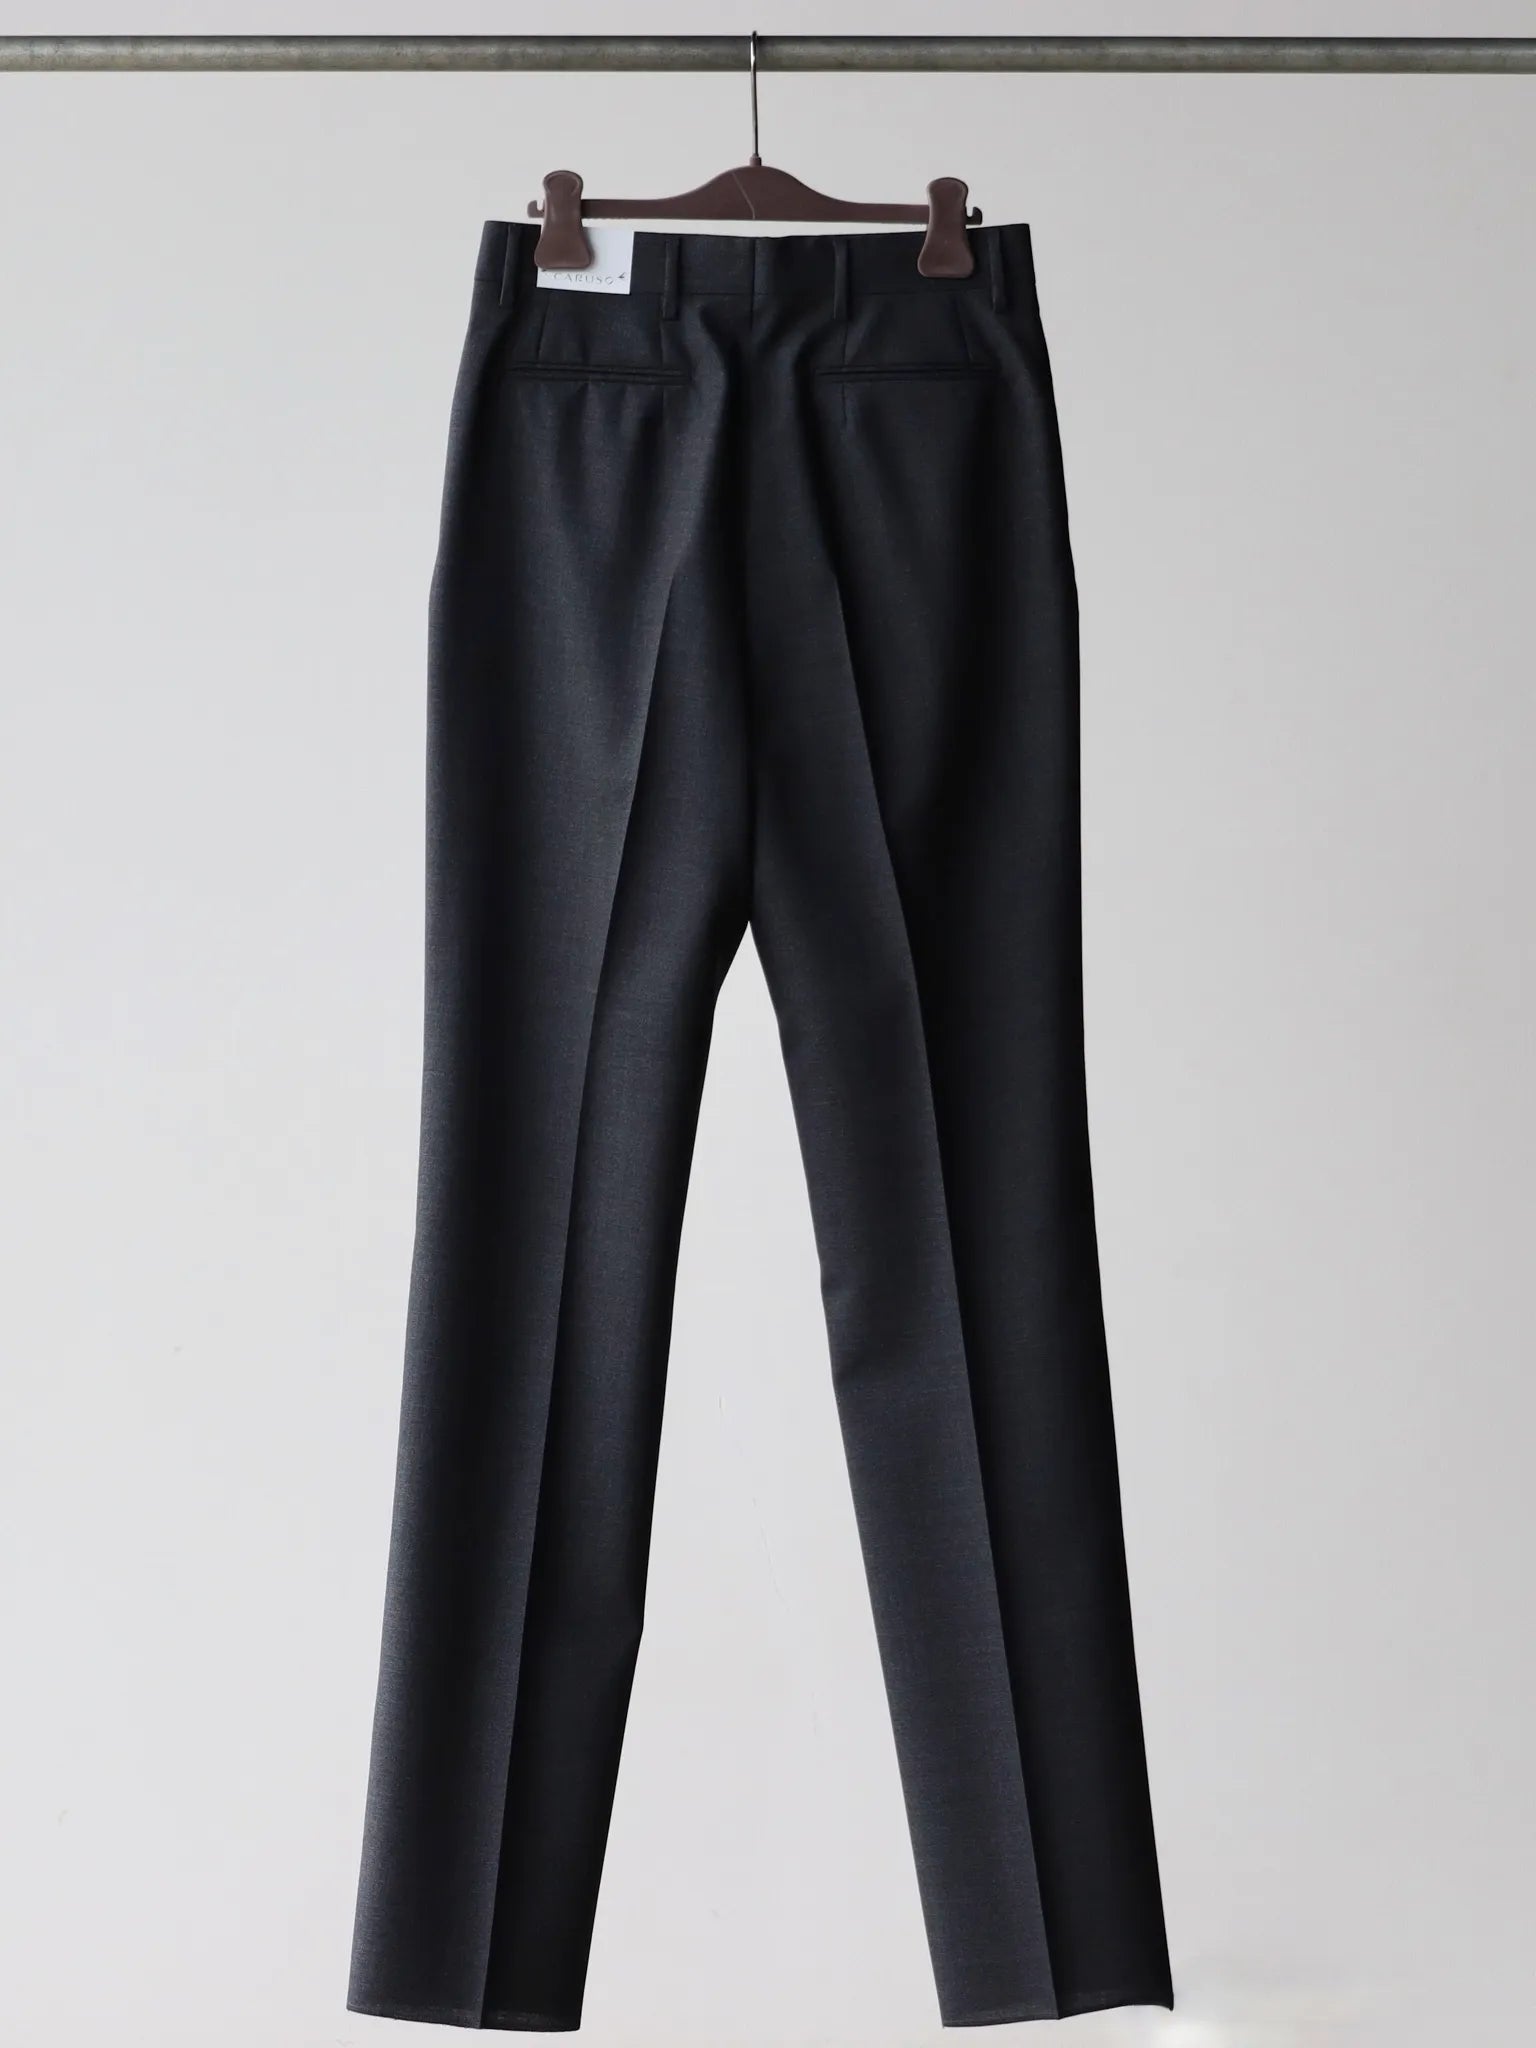 neat-caruso-neat-solid-trousers-gray-3